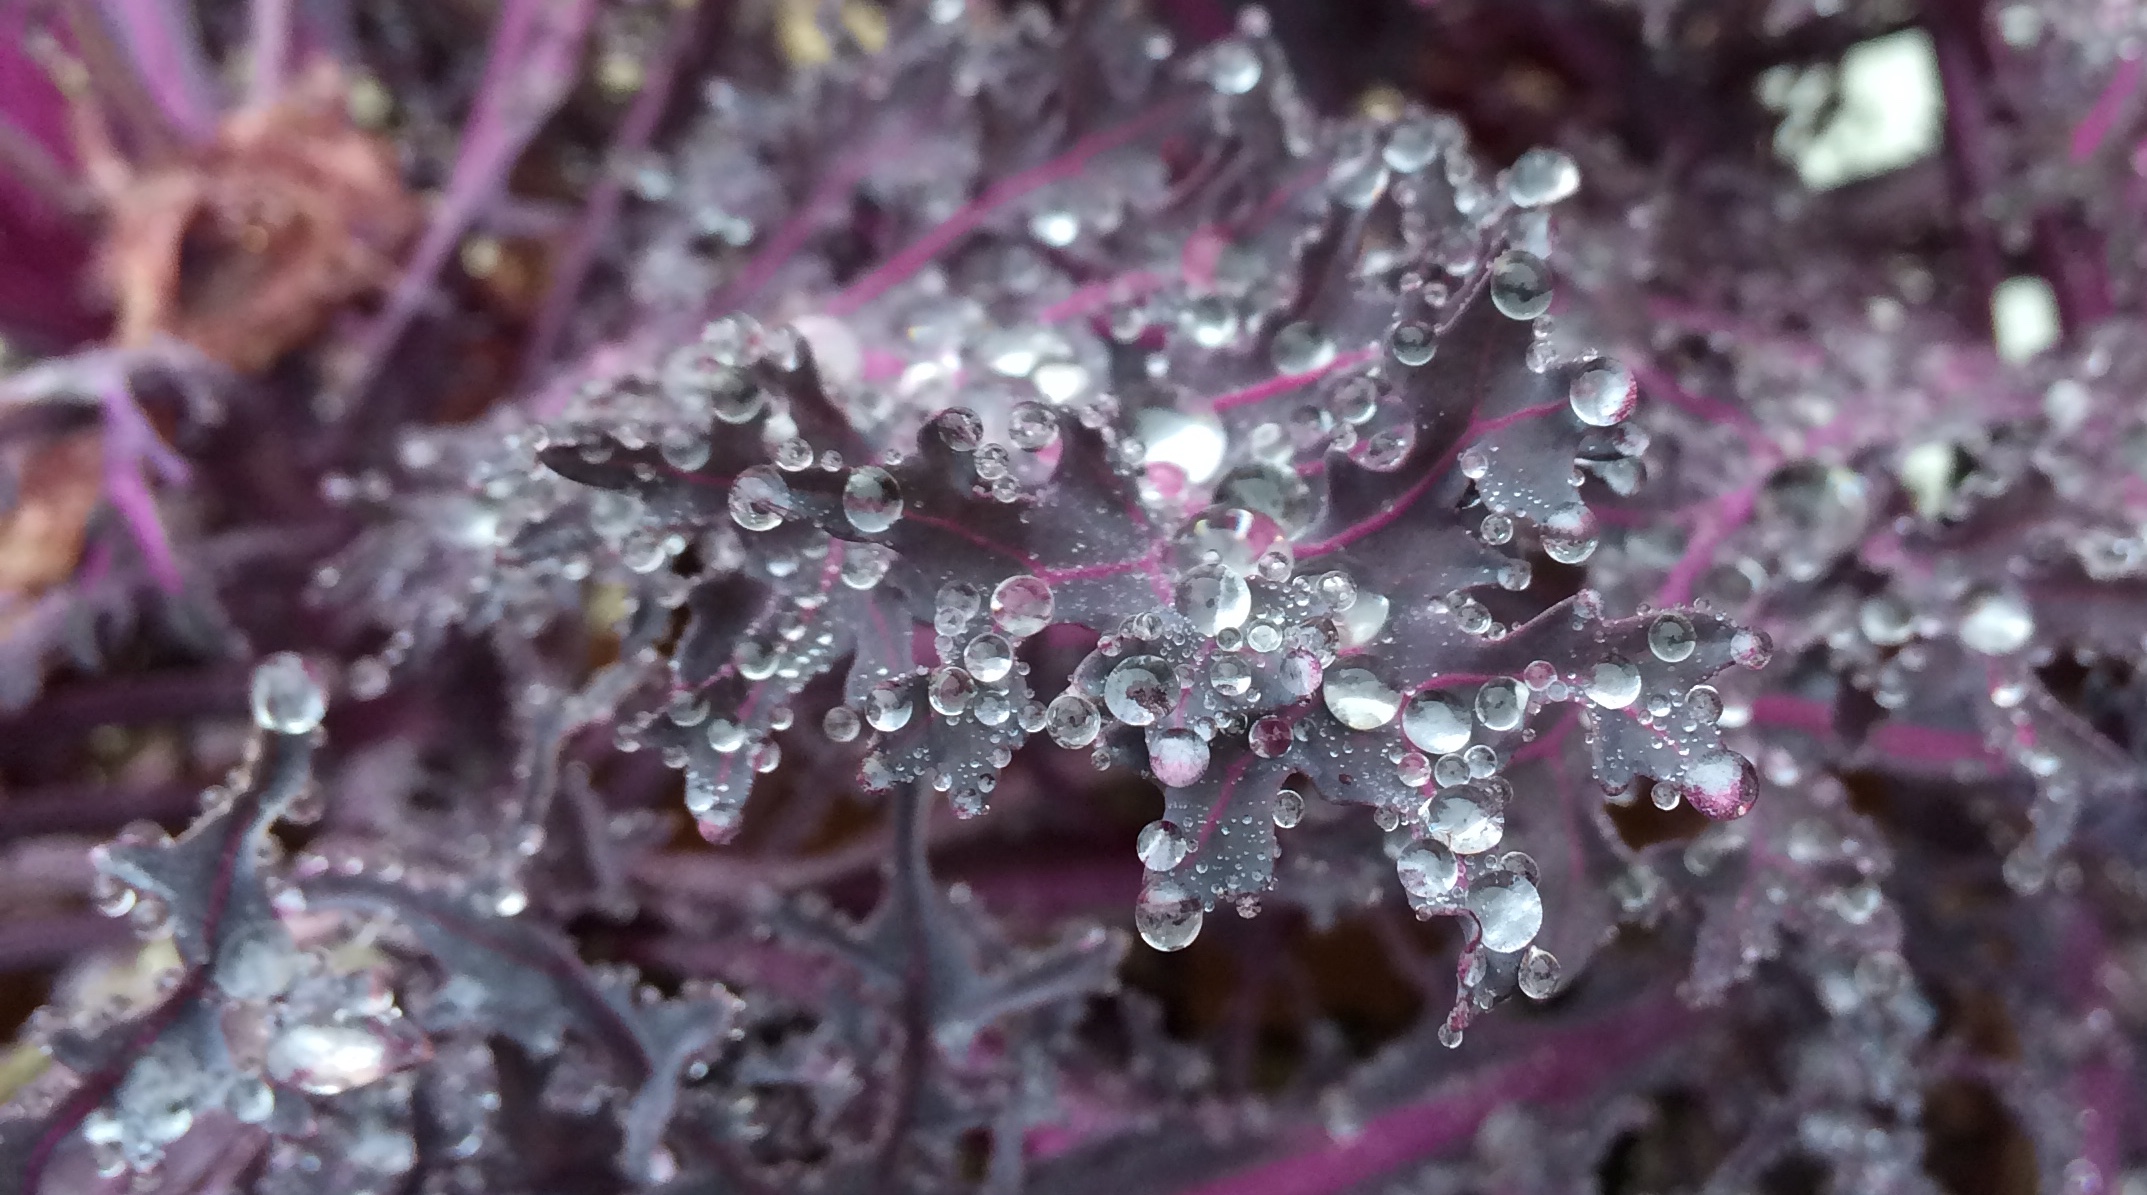 kale with frost